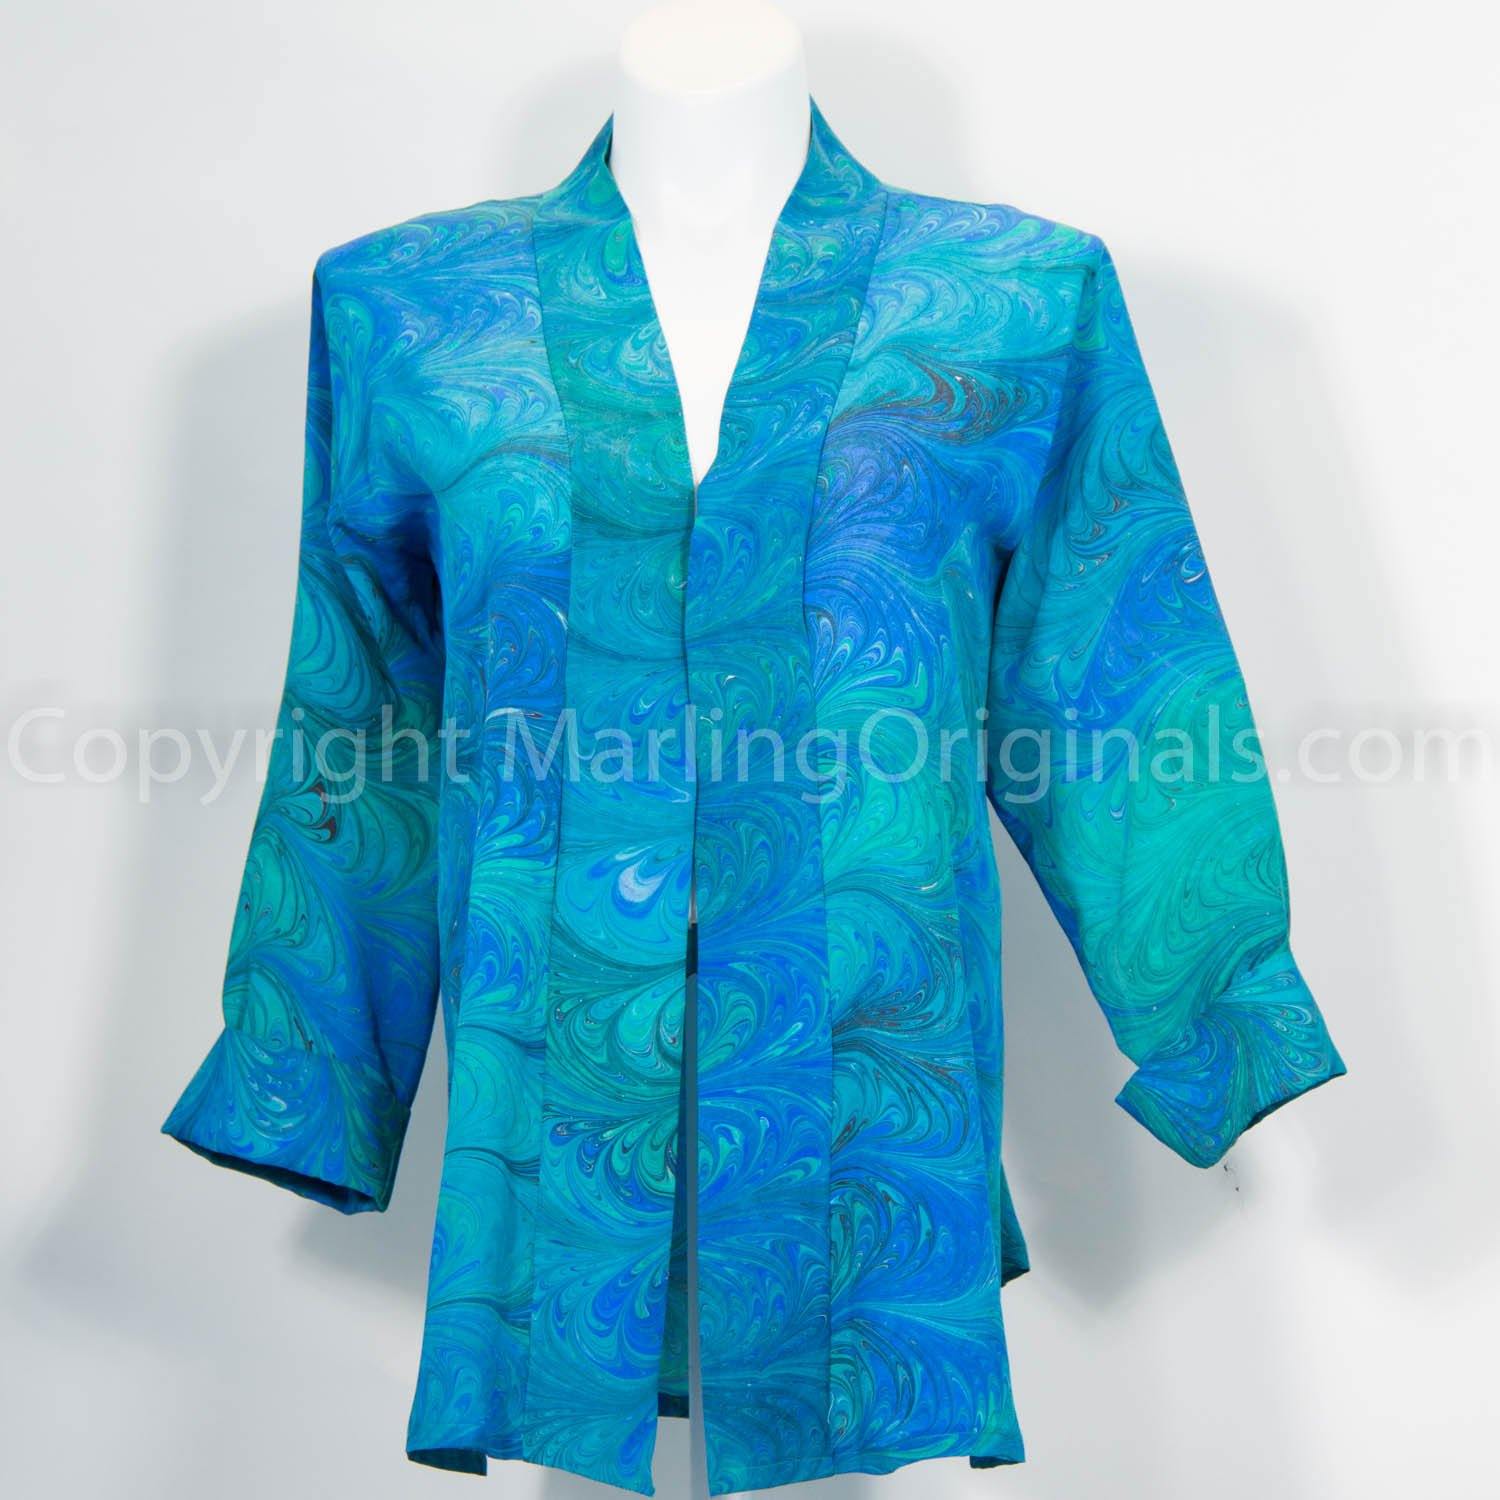 Handmarbled jacket plus size in brilliant green, blue shades. Swing style jacket, front band, cuffs